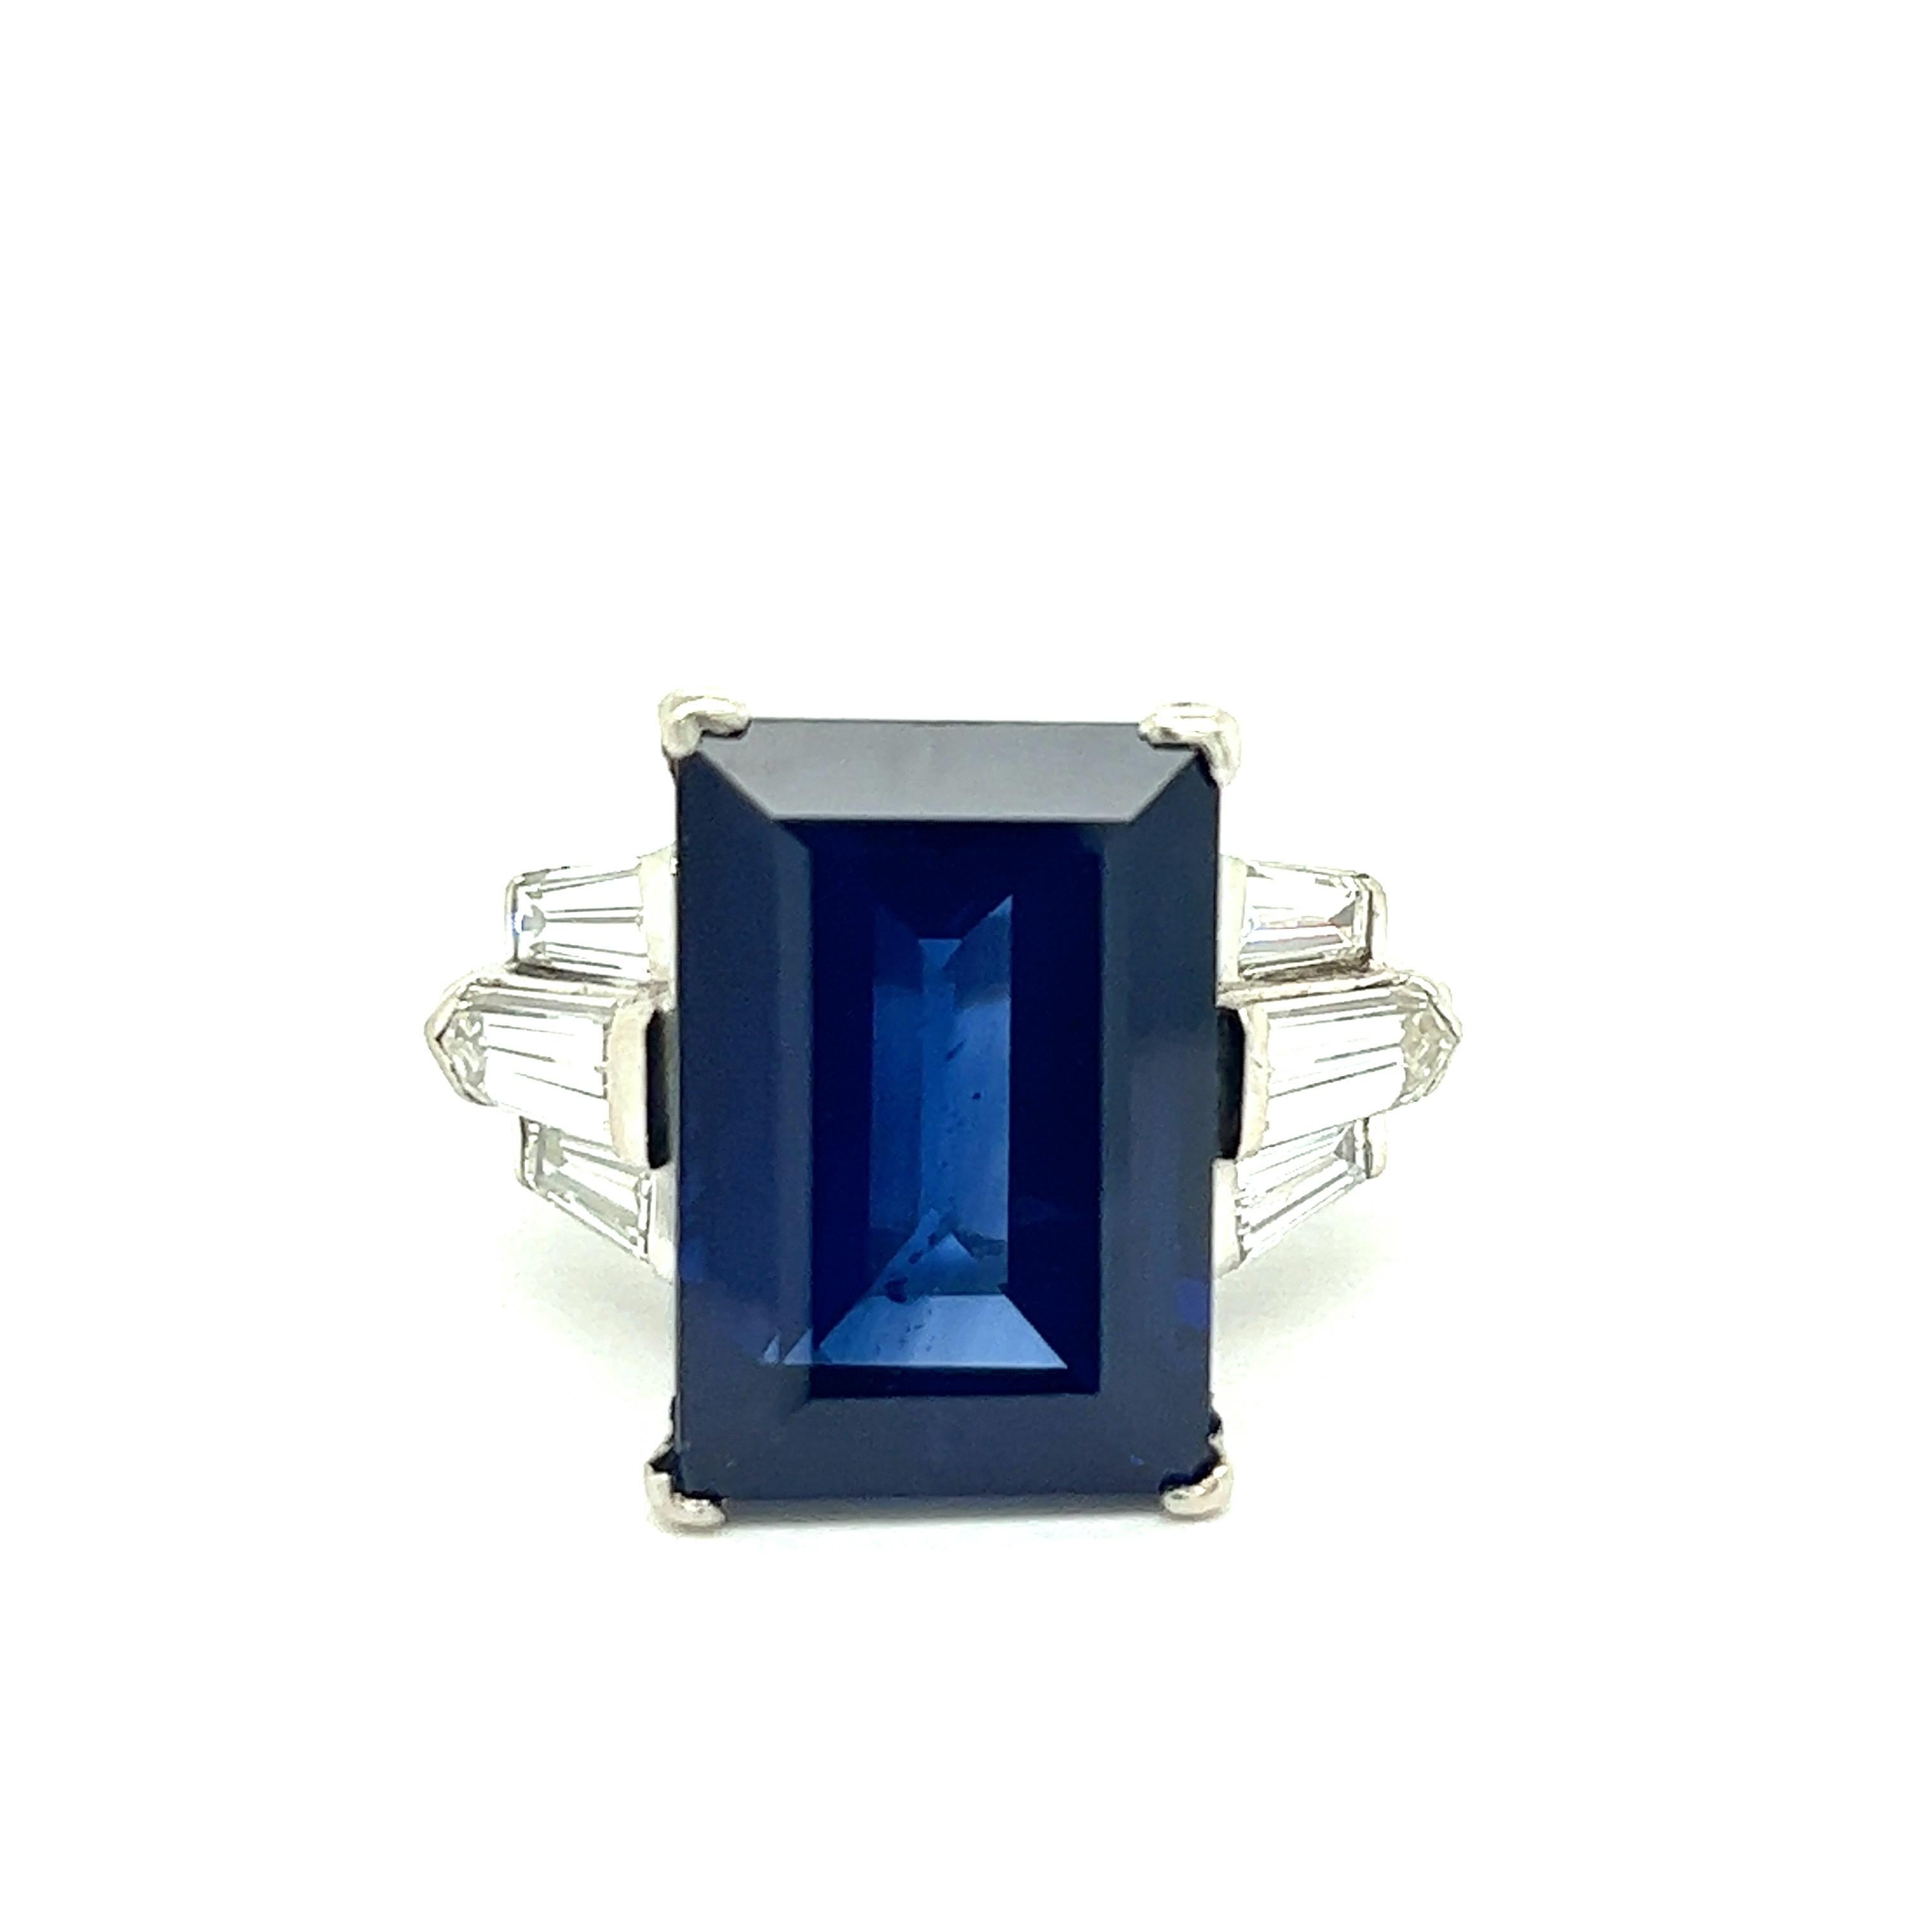 Sapphire Diamond Cocktail Ring

Rectangular step-cut sapphire of 12.25 carats (16.01 x 10.94 x 6.41 mm), with four near-colorless tapered baguette diamonds and two modified kite step-cuts; mounted on platinum 

Size: 6.25 US
Total weight: 11.7